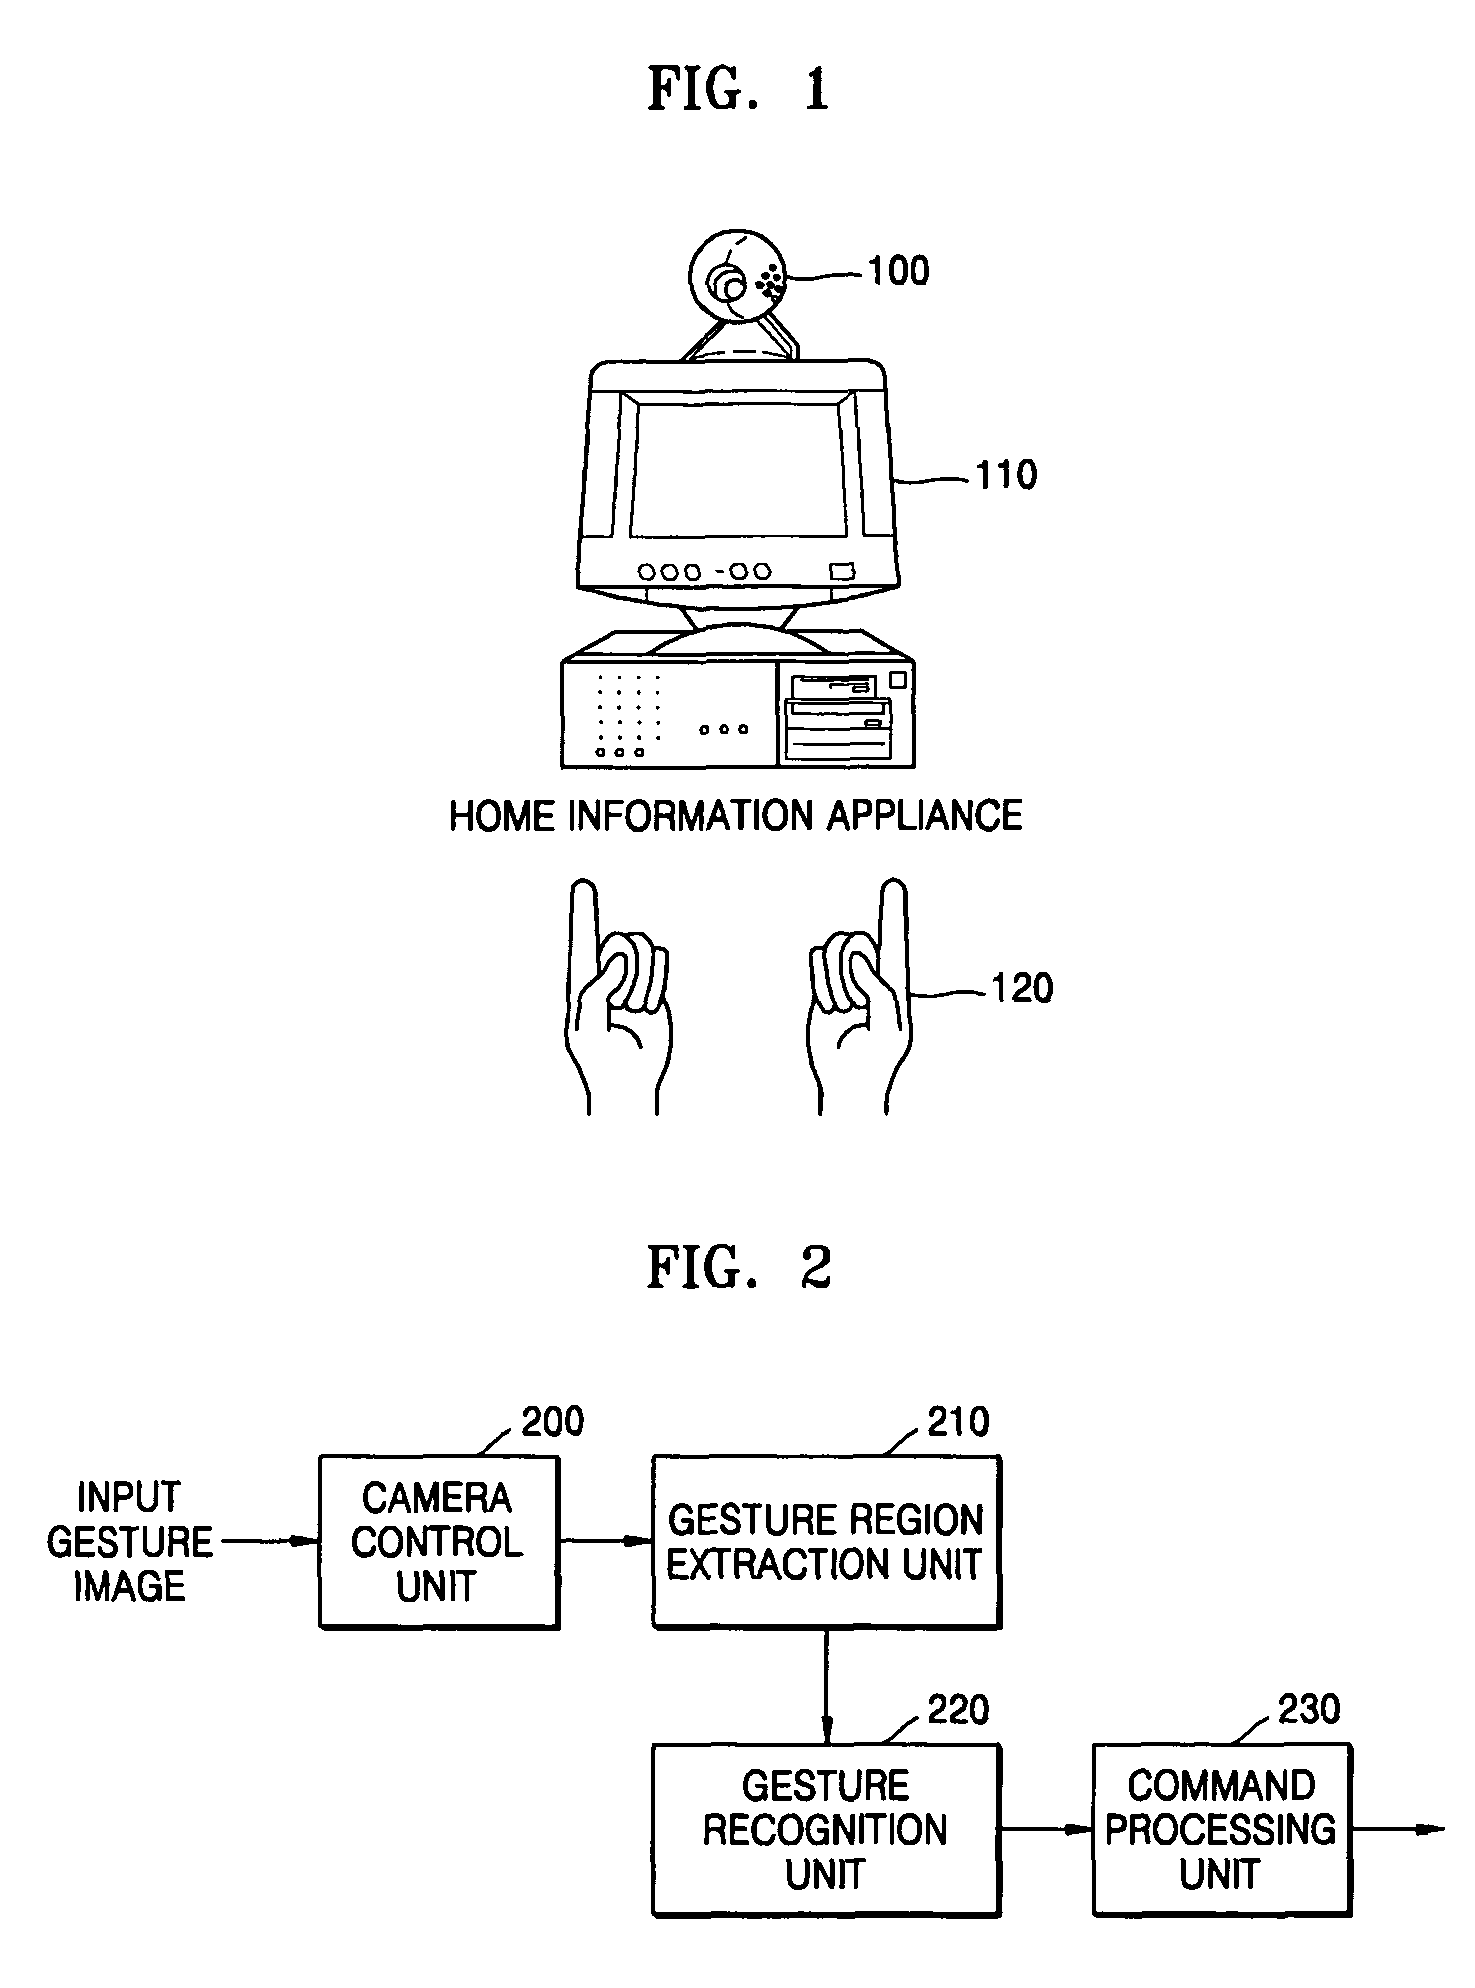 Virtual mouse driving apparatus and method using two-handed gestures